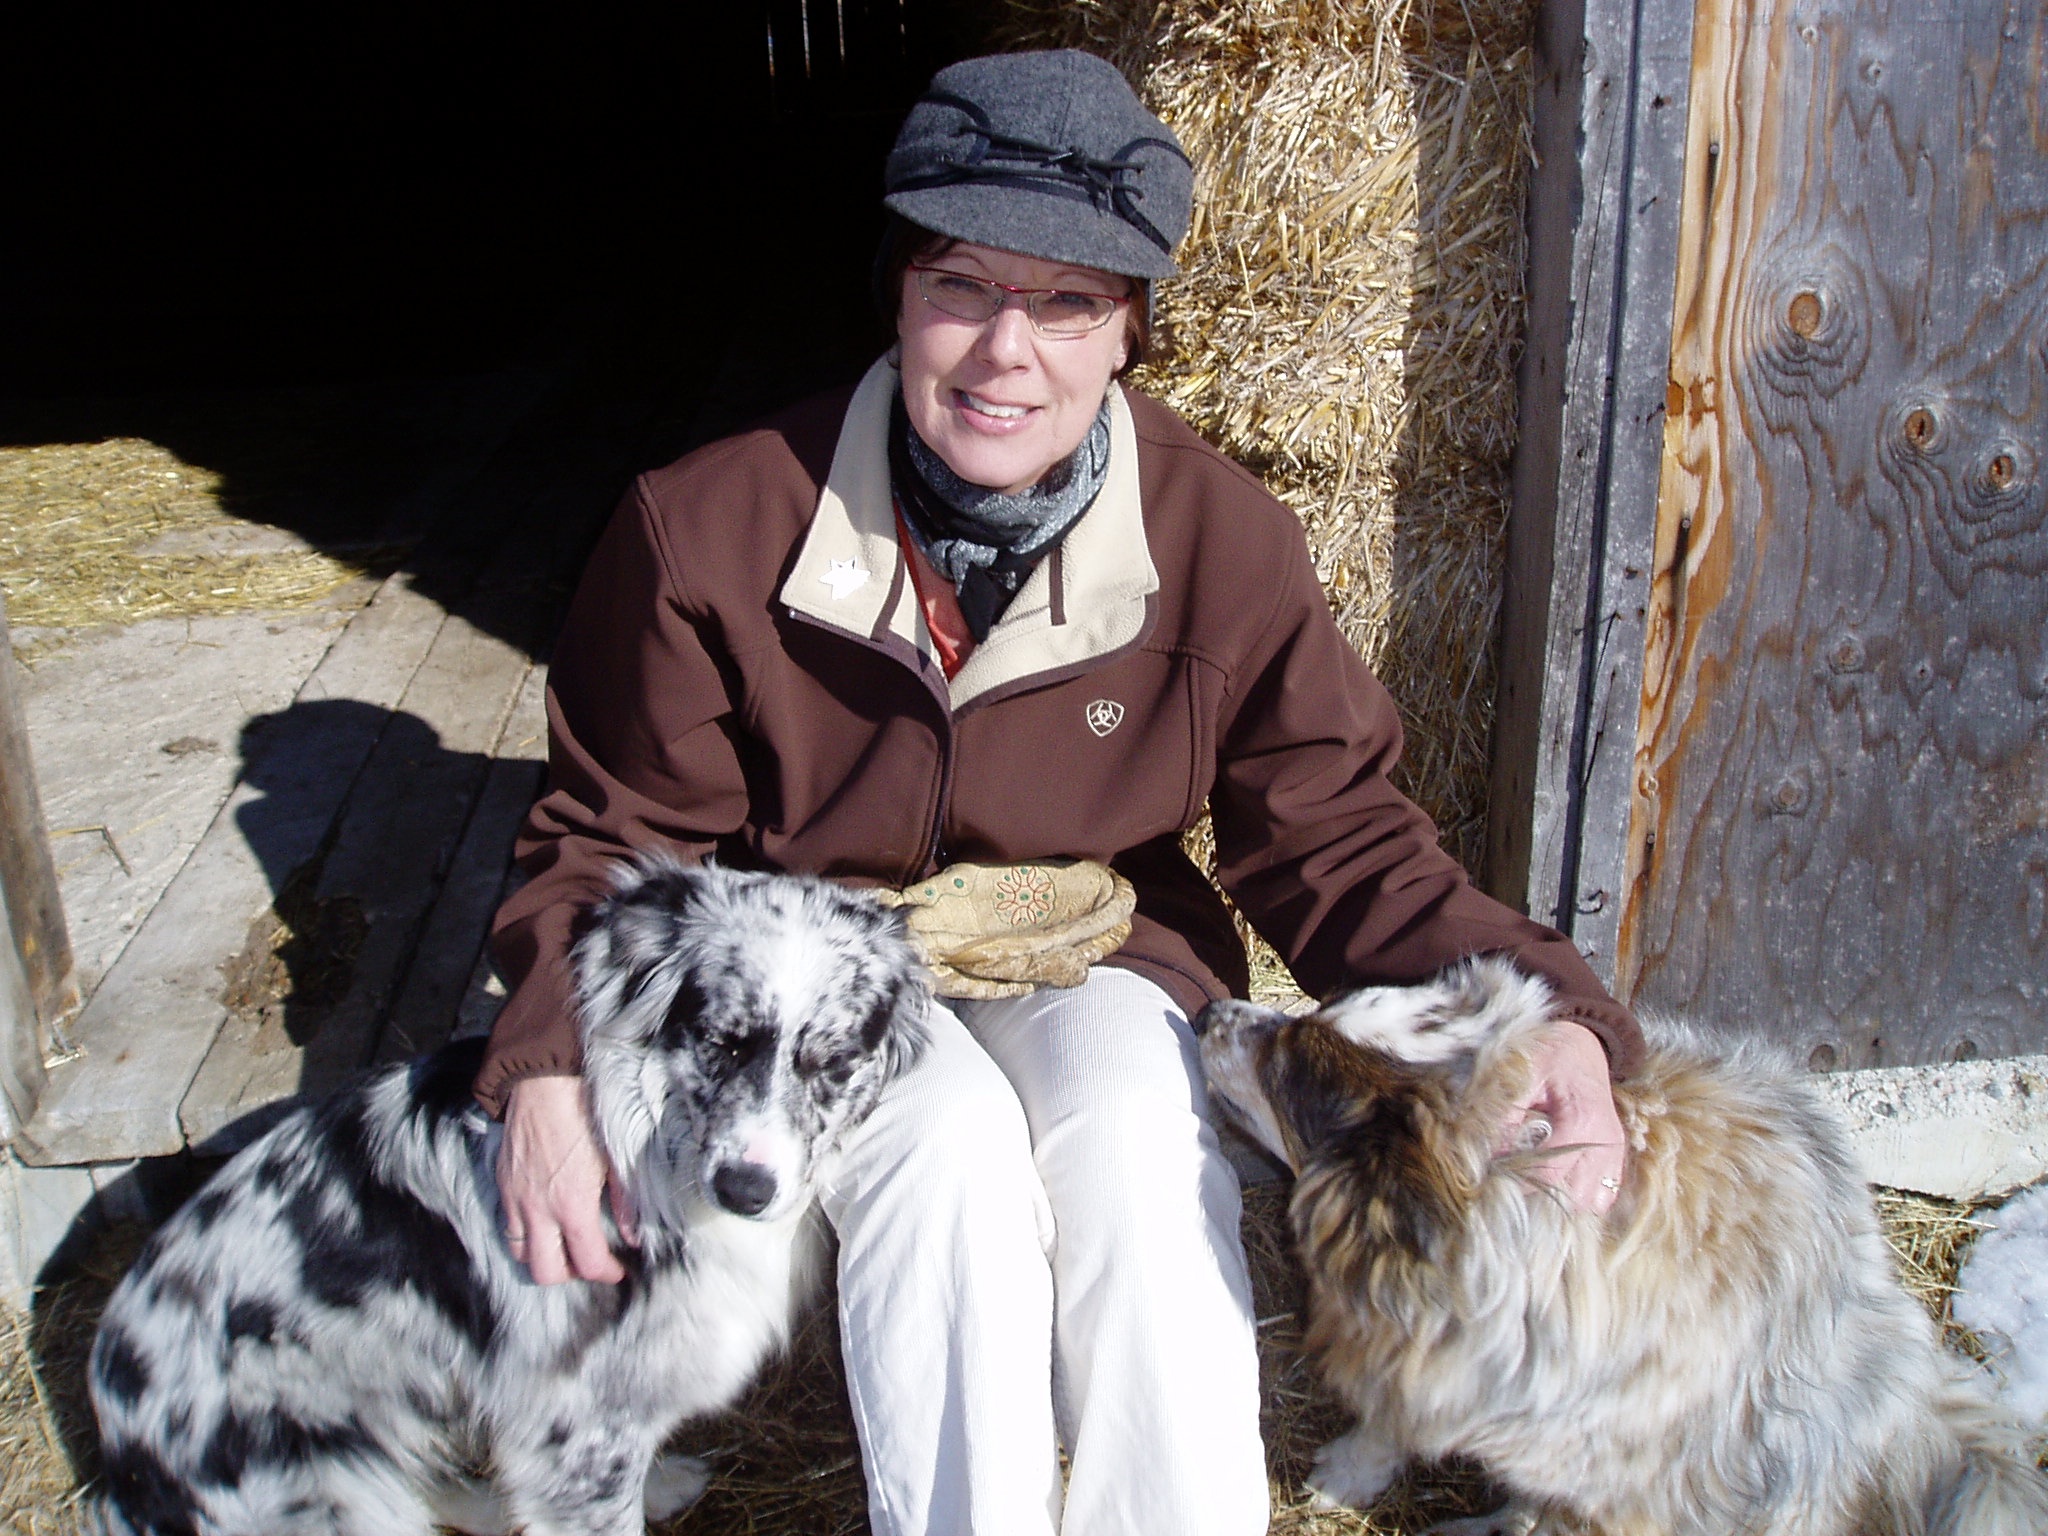 Women clearly understand the farm and are deeply committed to the functionality and profitability of the farm.